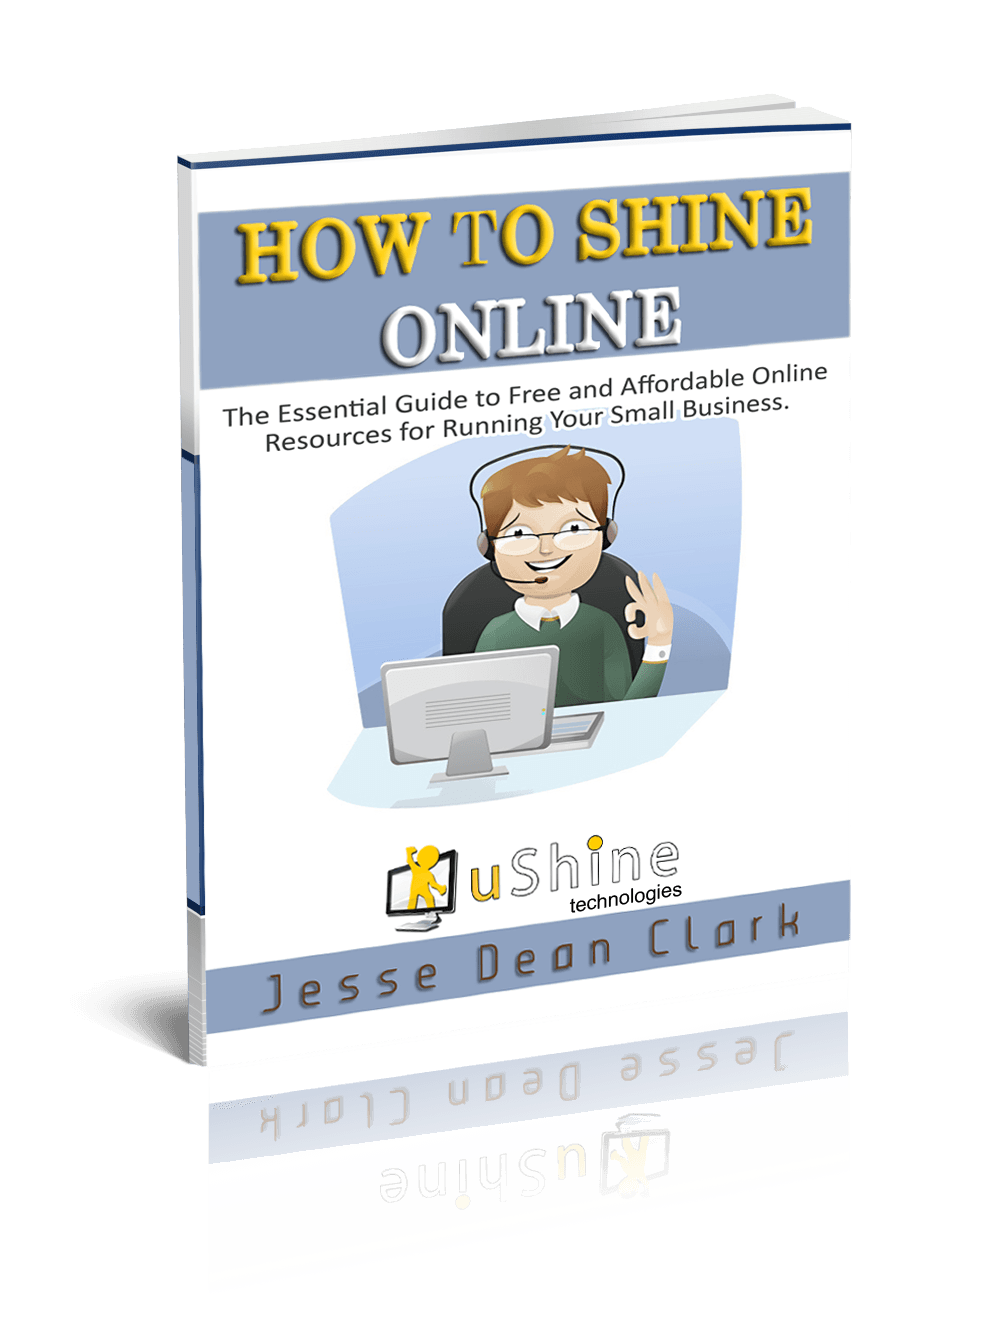 a book titled how to shine online by jesse dean clark